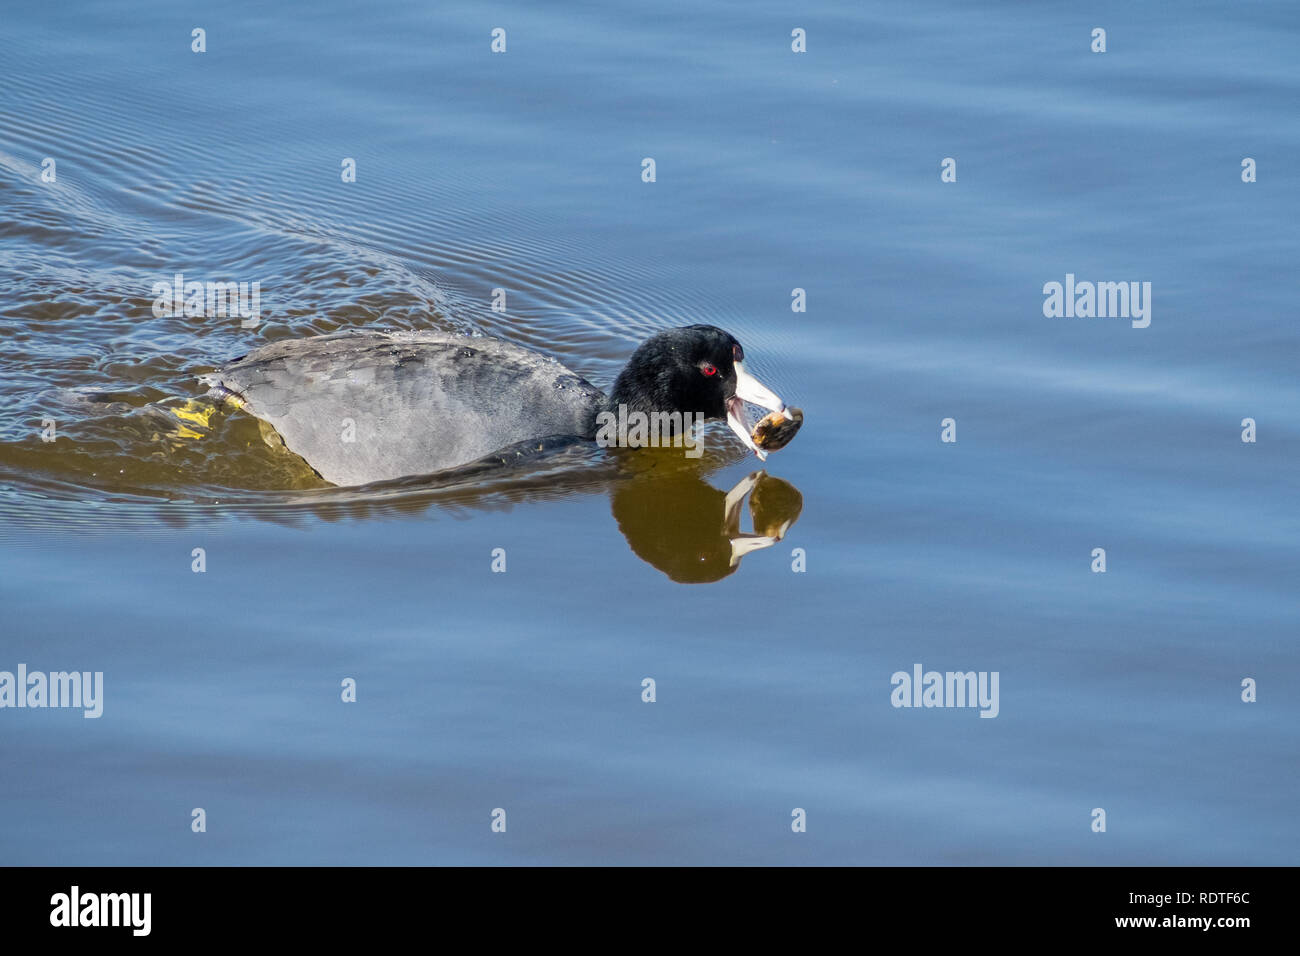 American coot (Fulica americana) fishing and eating mussels, Shoreline Lake and Park, Mountain View, San Francisco bay area, California Stock Photo